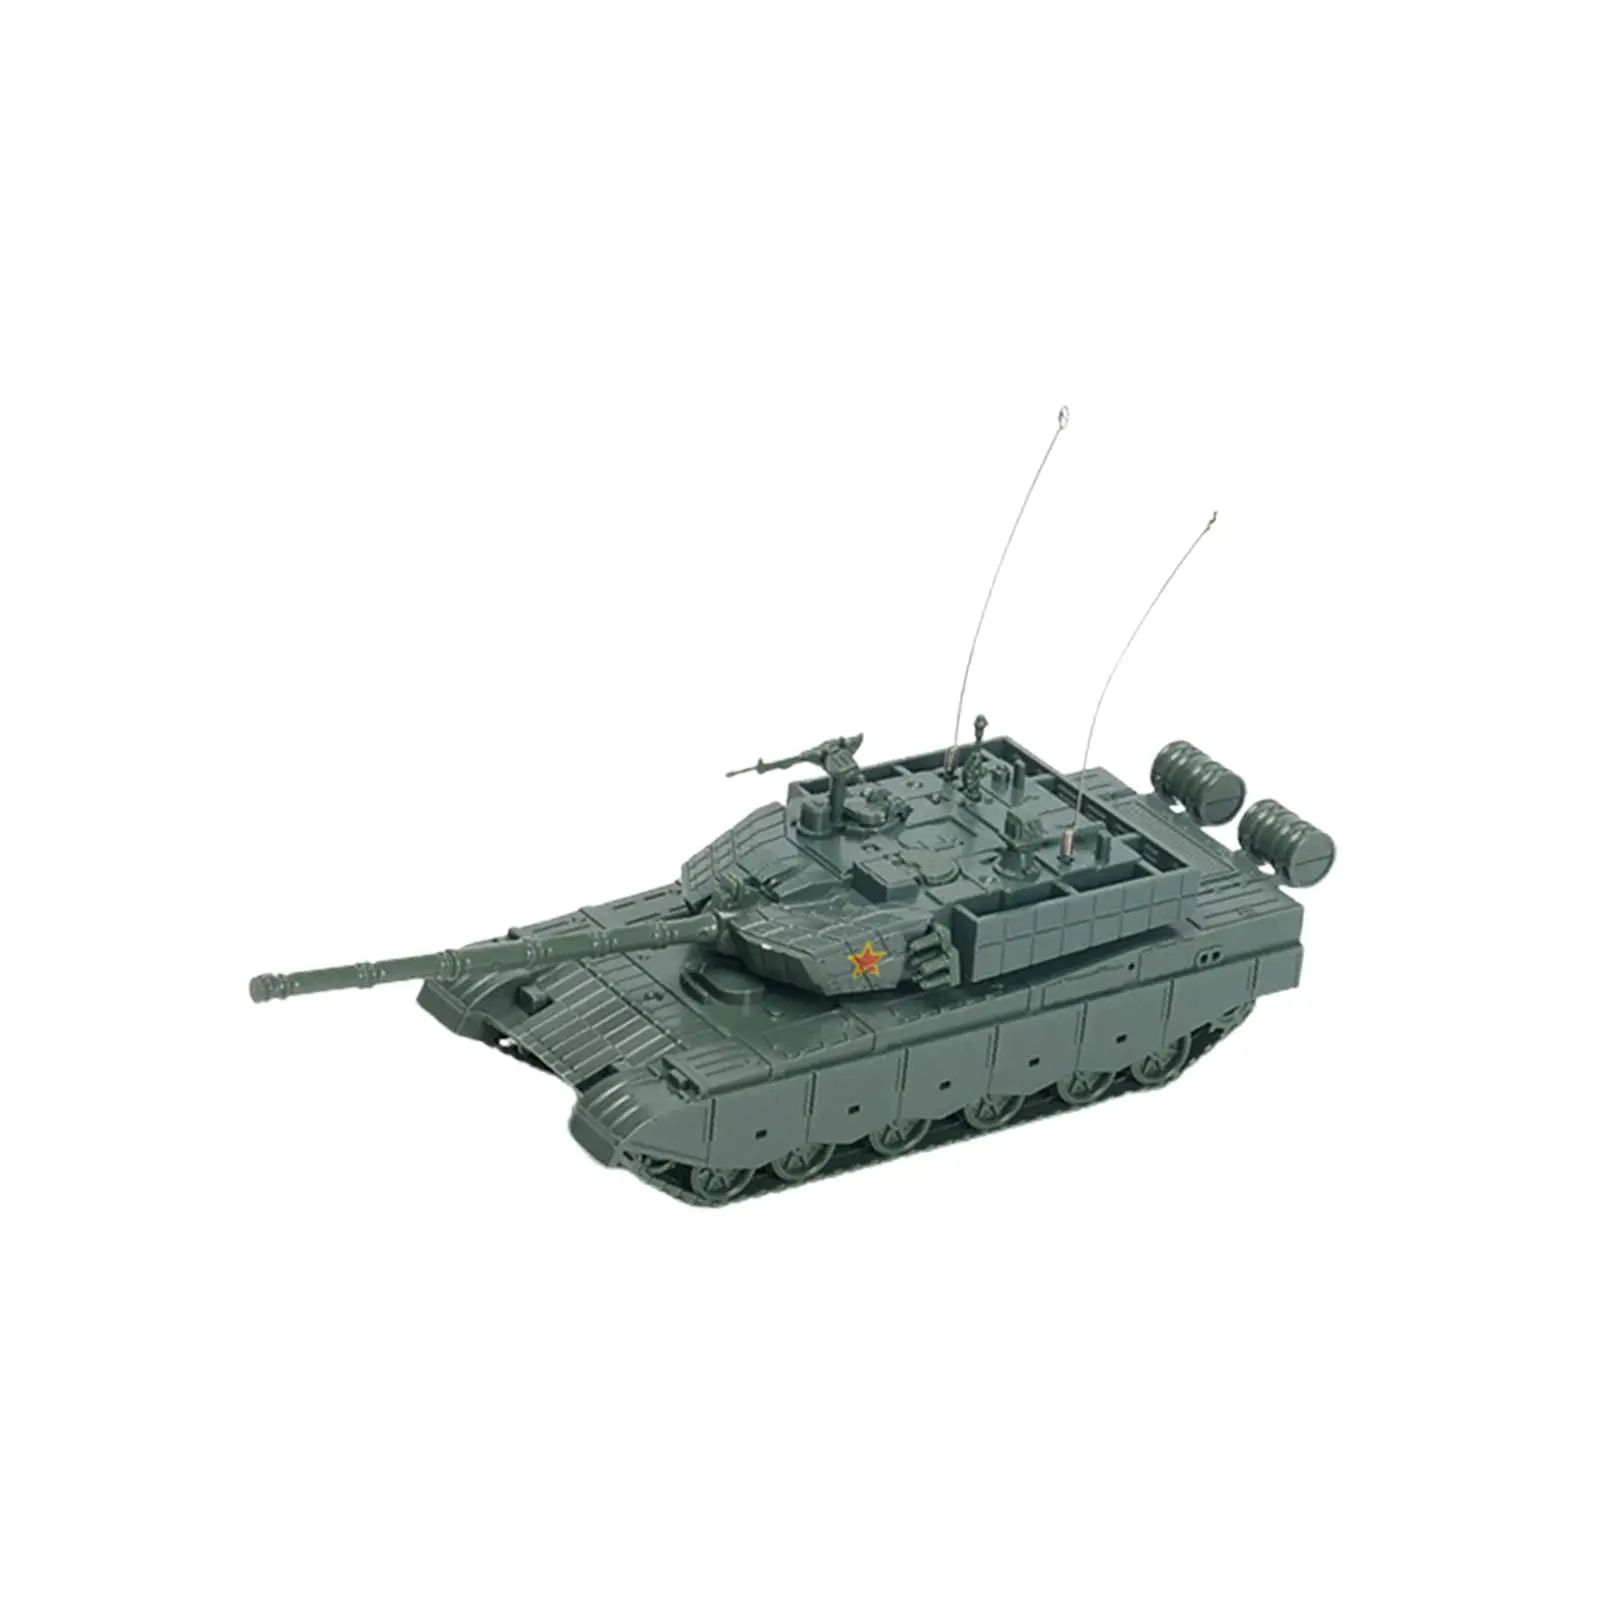 1:72 Scale Education Toy Miniature Puzzles Assembled Tank Model 4D Tank Model for Display Collections Gift Kids Children